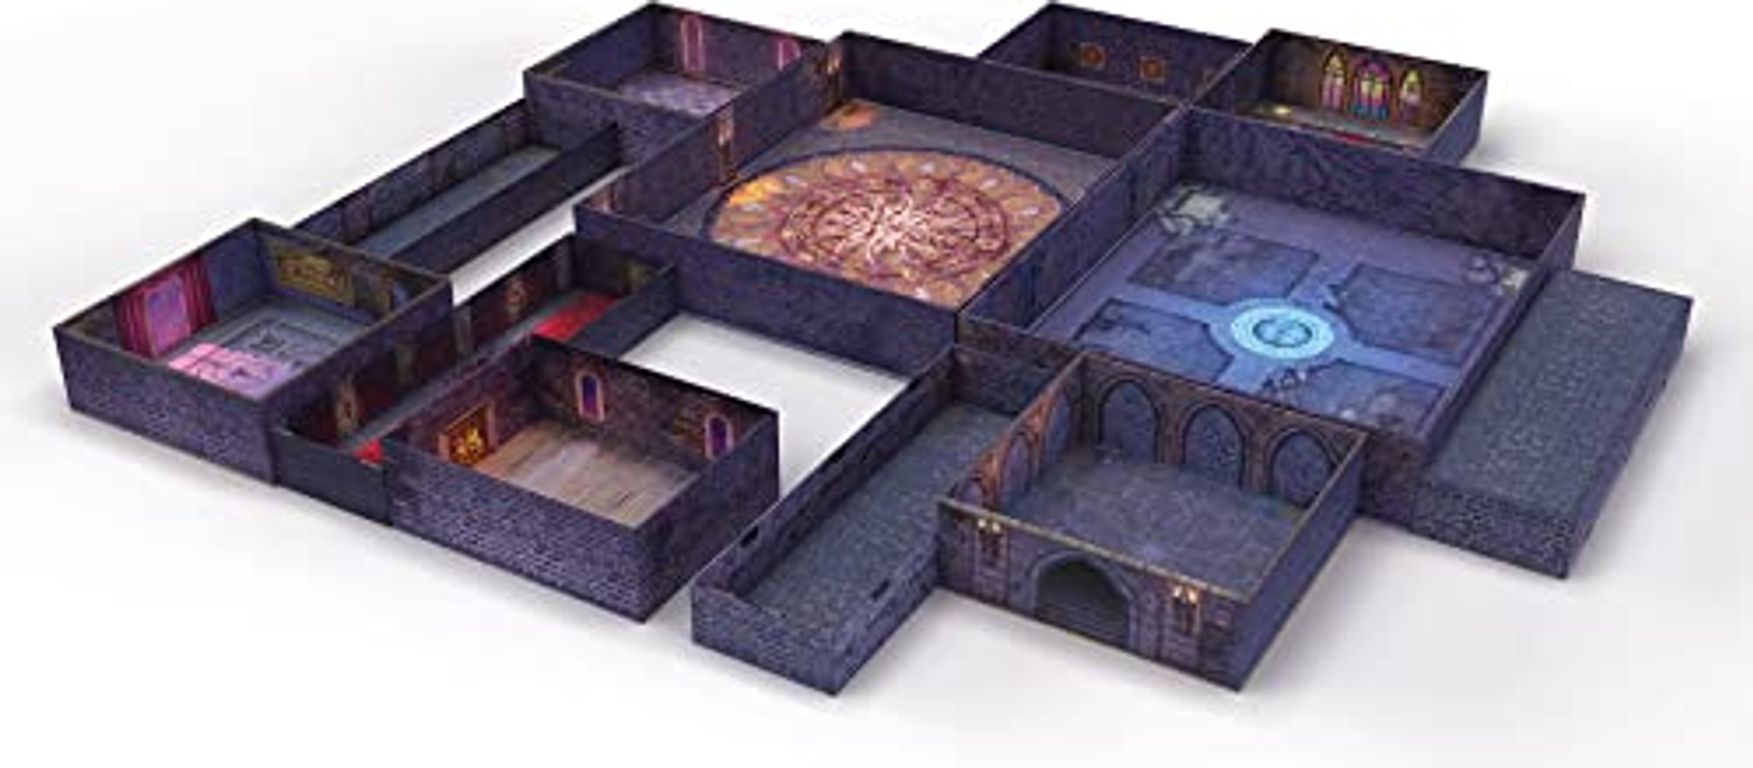 Tenfold Dungeon: The Castle components